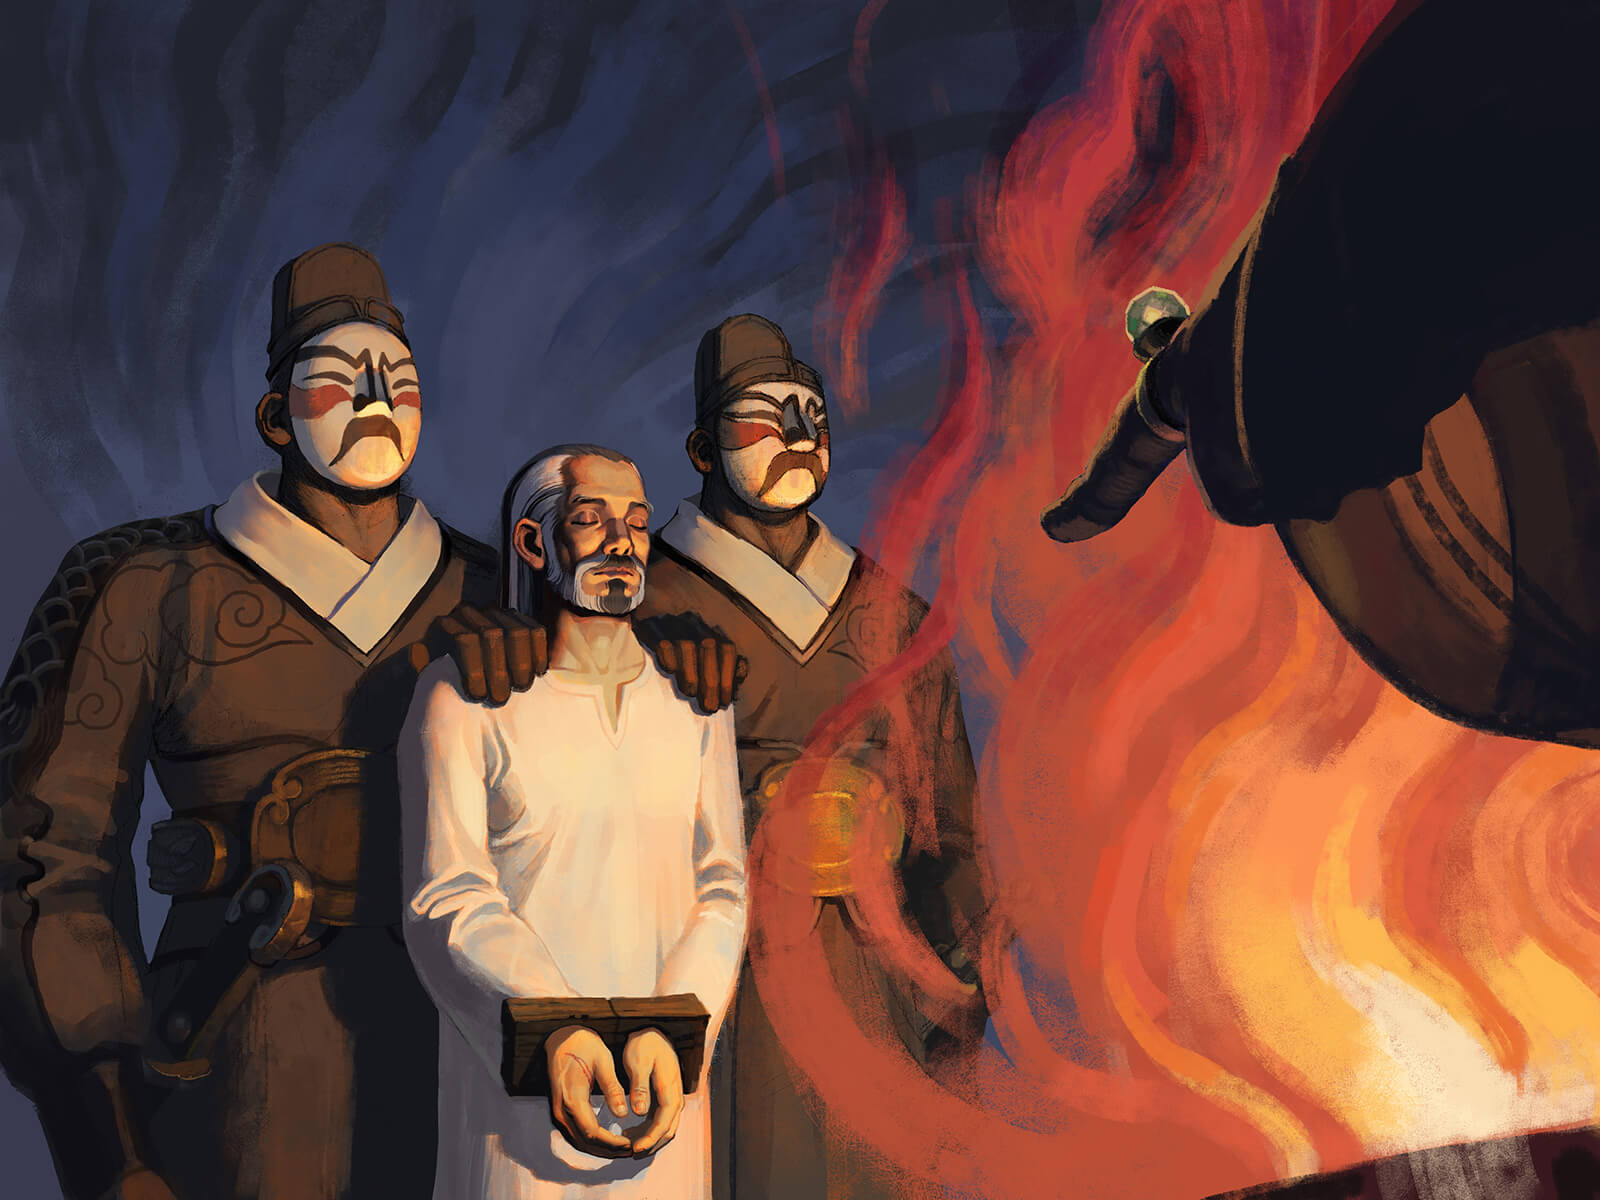 digital painting of a man in a white robe with his hands in cuffs guarded by two soldiers in front of a billowing fire